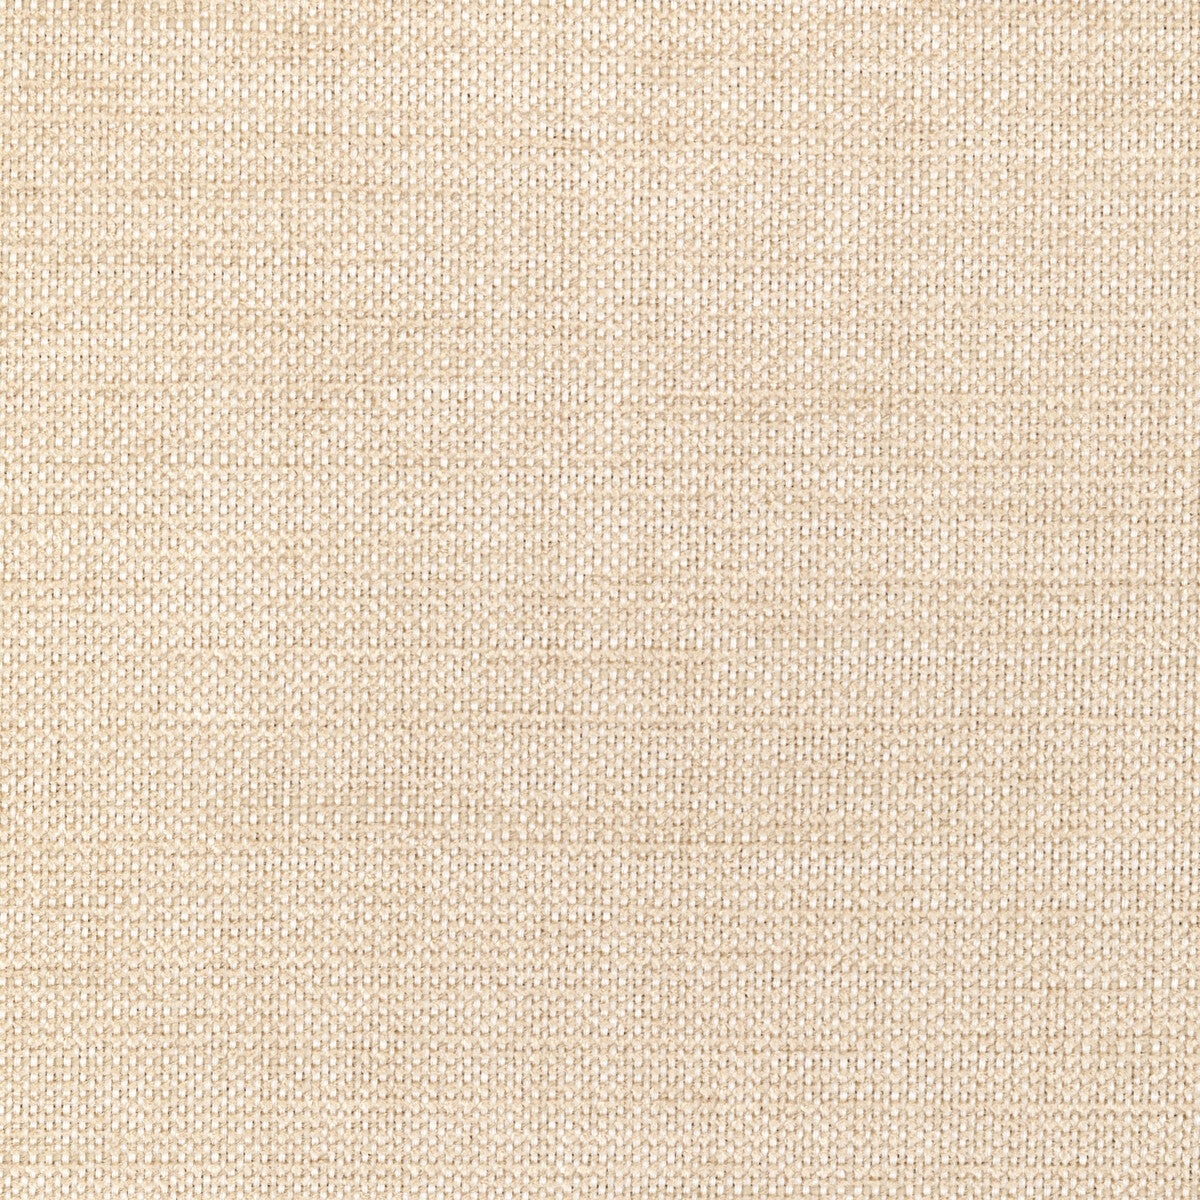 Kravet Smart fabric in 36302-1 color - pattern 36302.1.0 - by Kravet Smart in the Performance Crypton Home collection